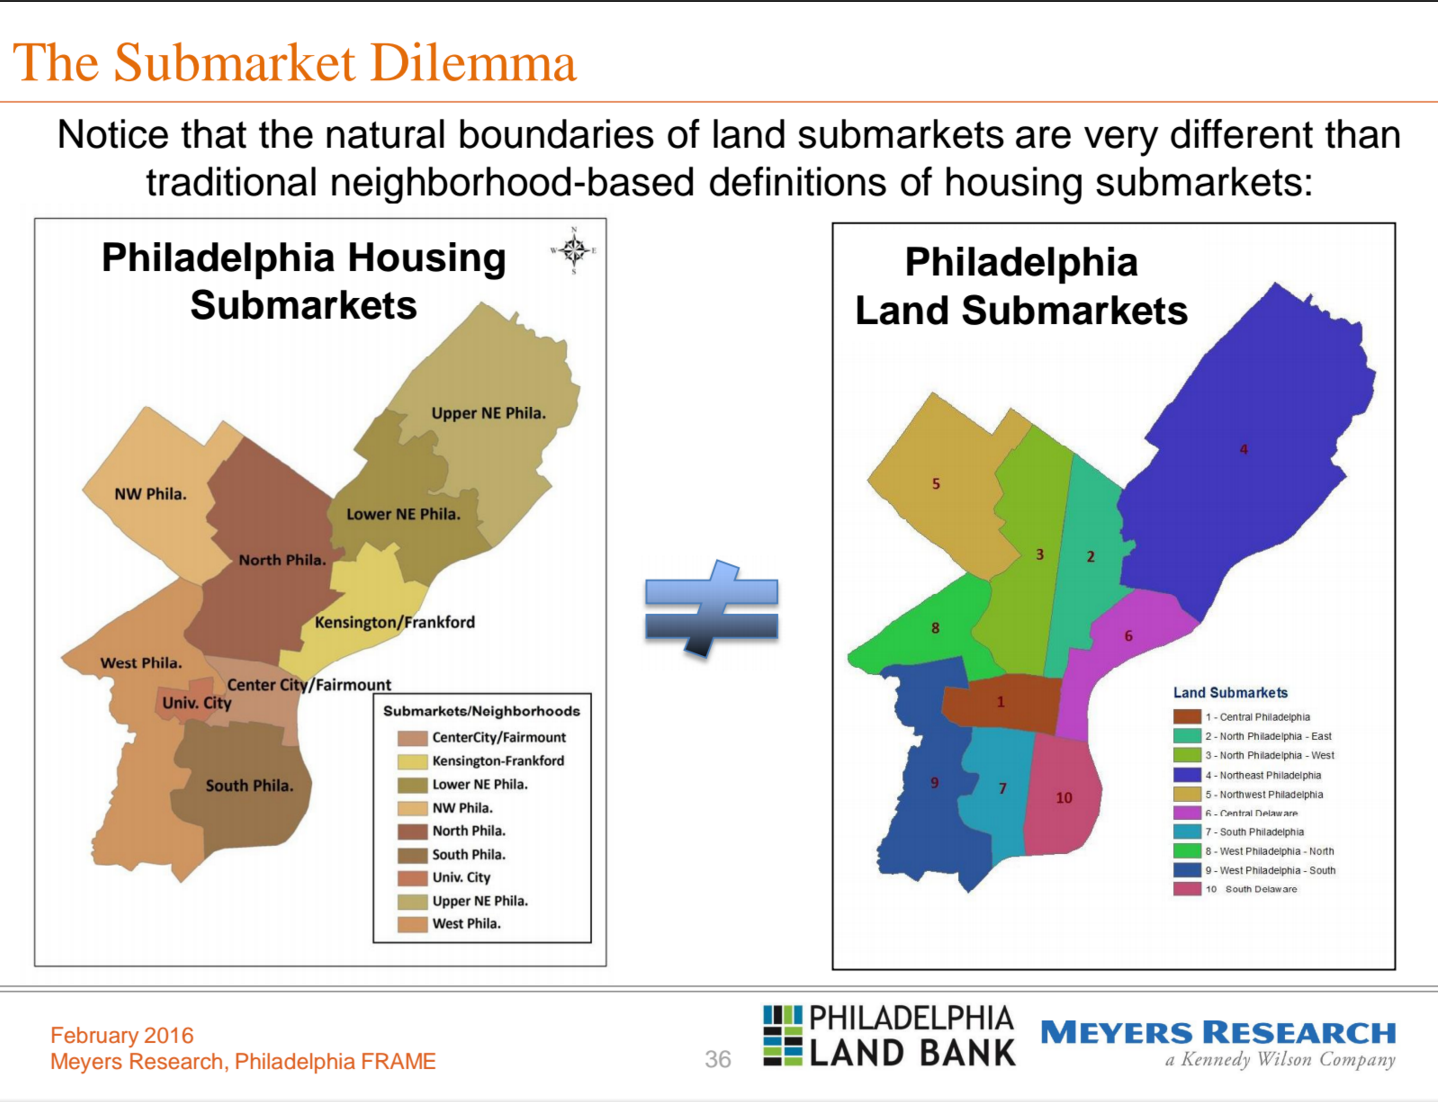 Housing and land submarkets